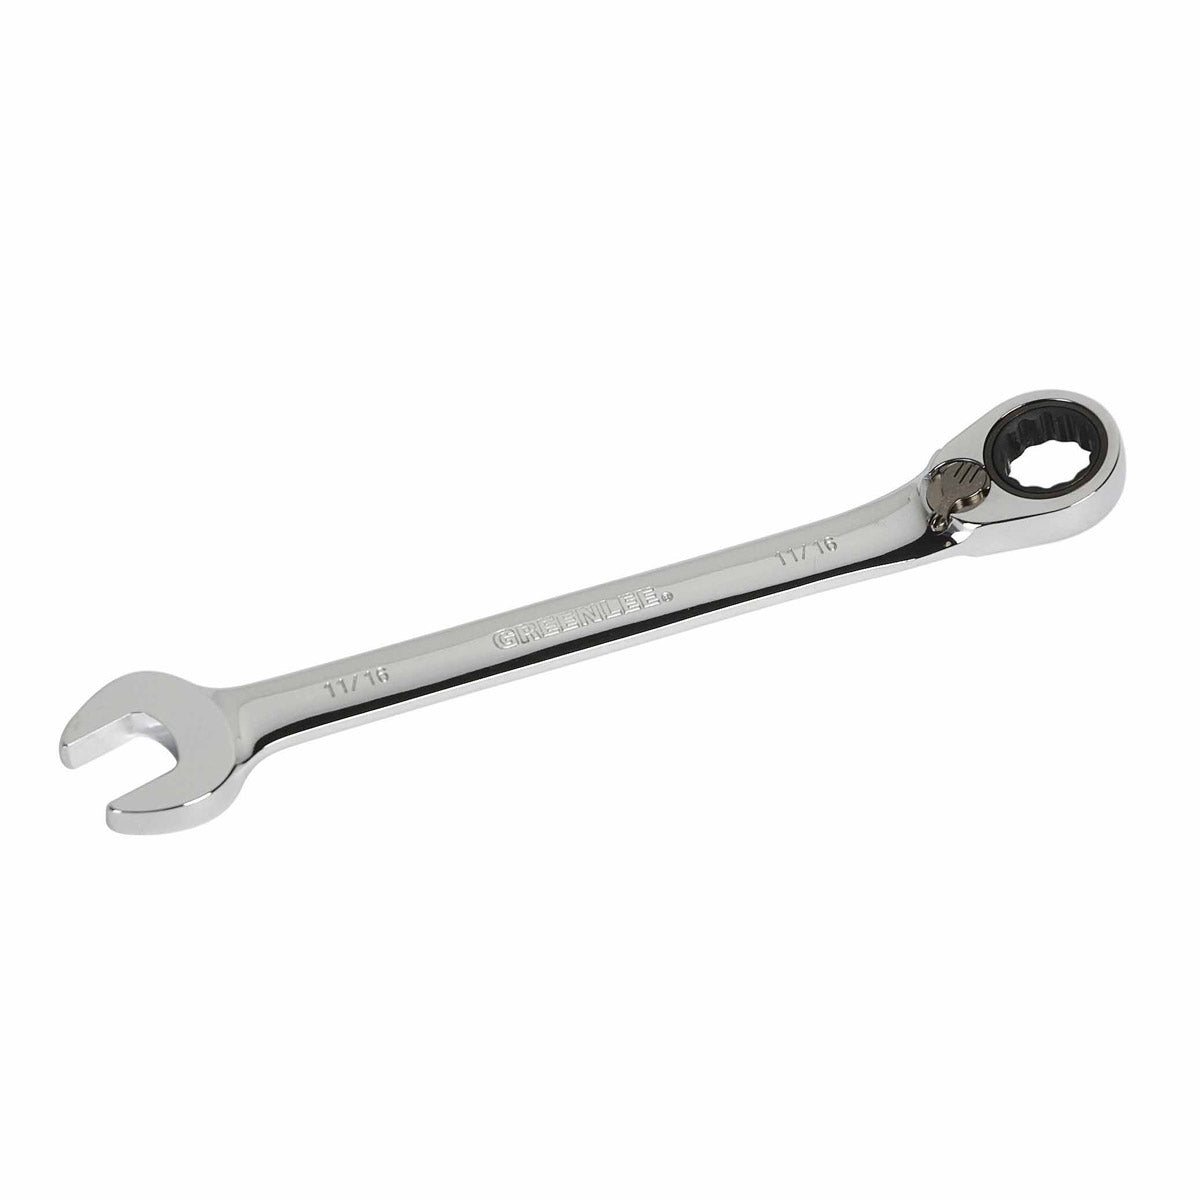 Greenlee 0354-18 WRENCH,COMBO RATCHET 11/16"